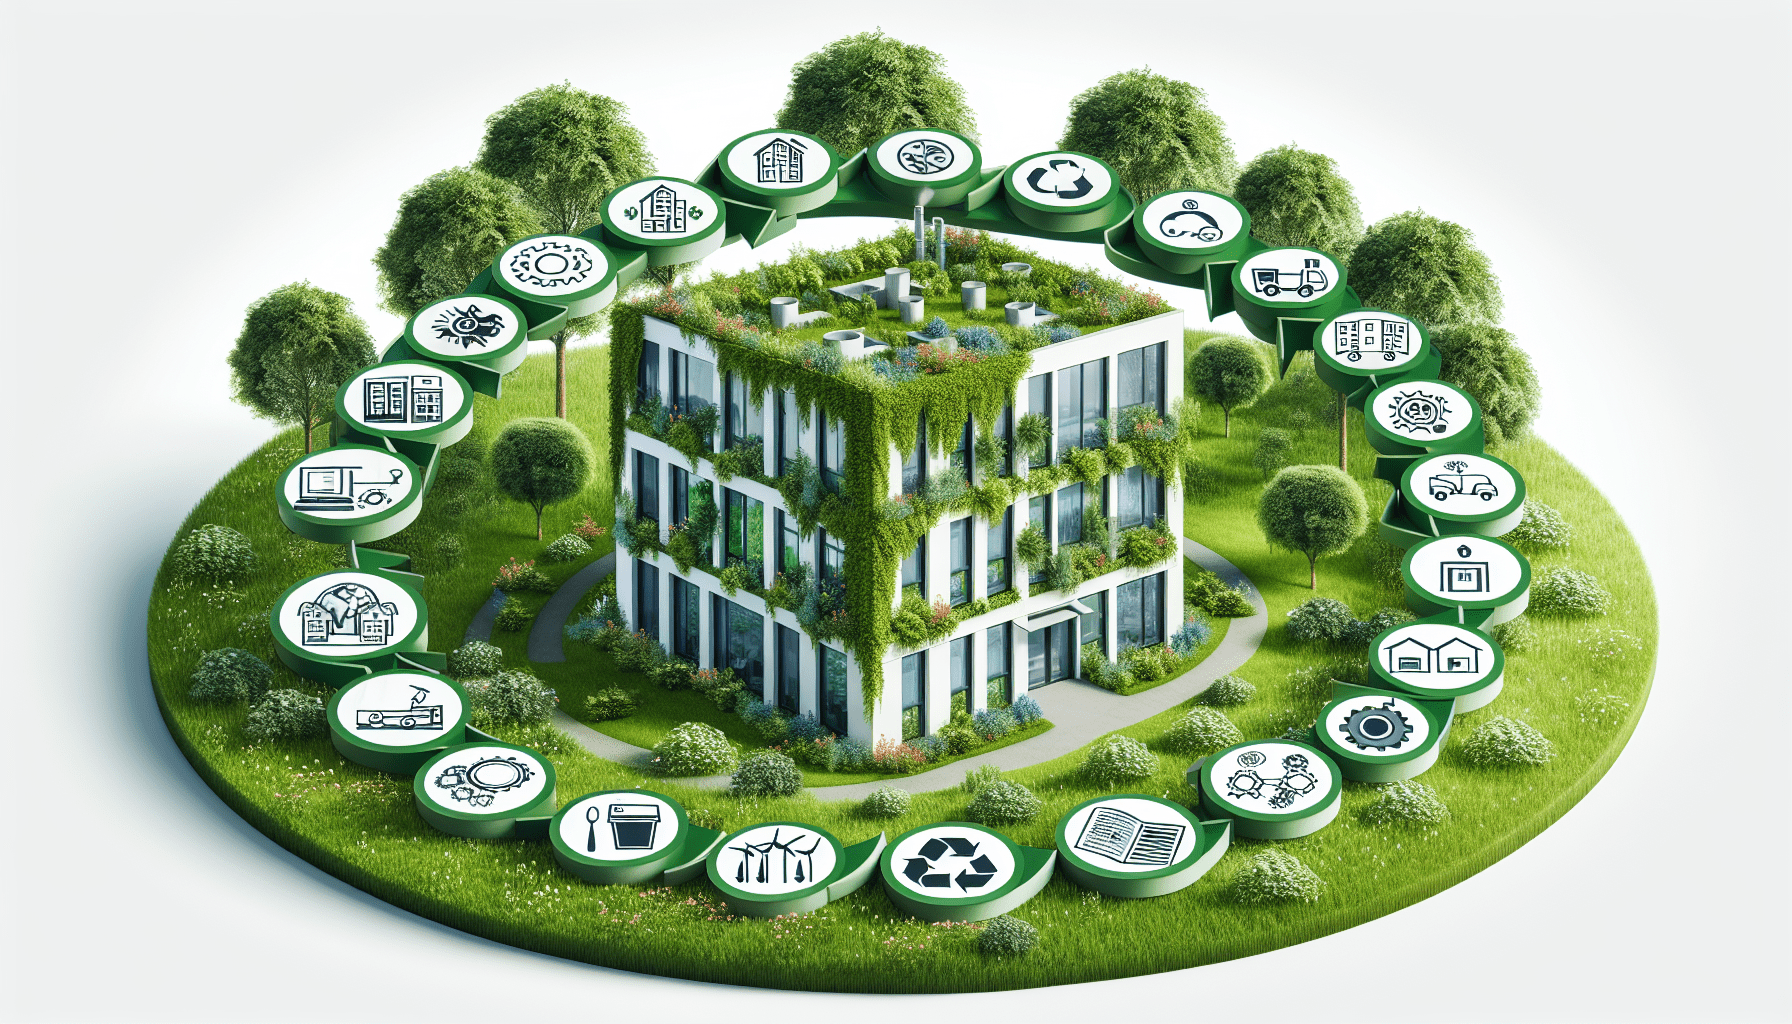 What Is The Role Of Life Cycle Assessment In Sustainable Architecture?